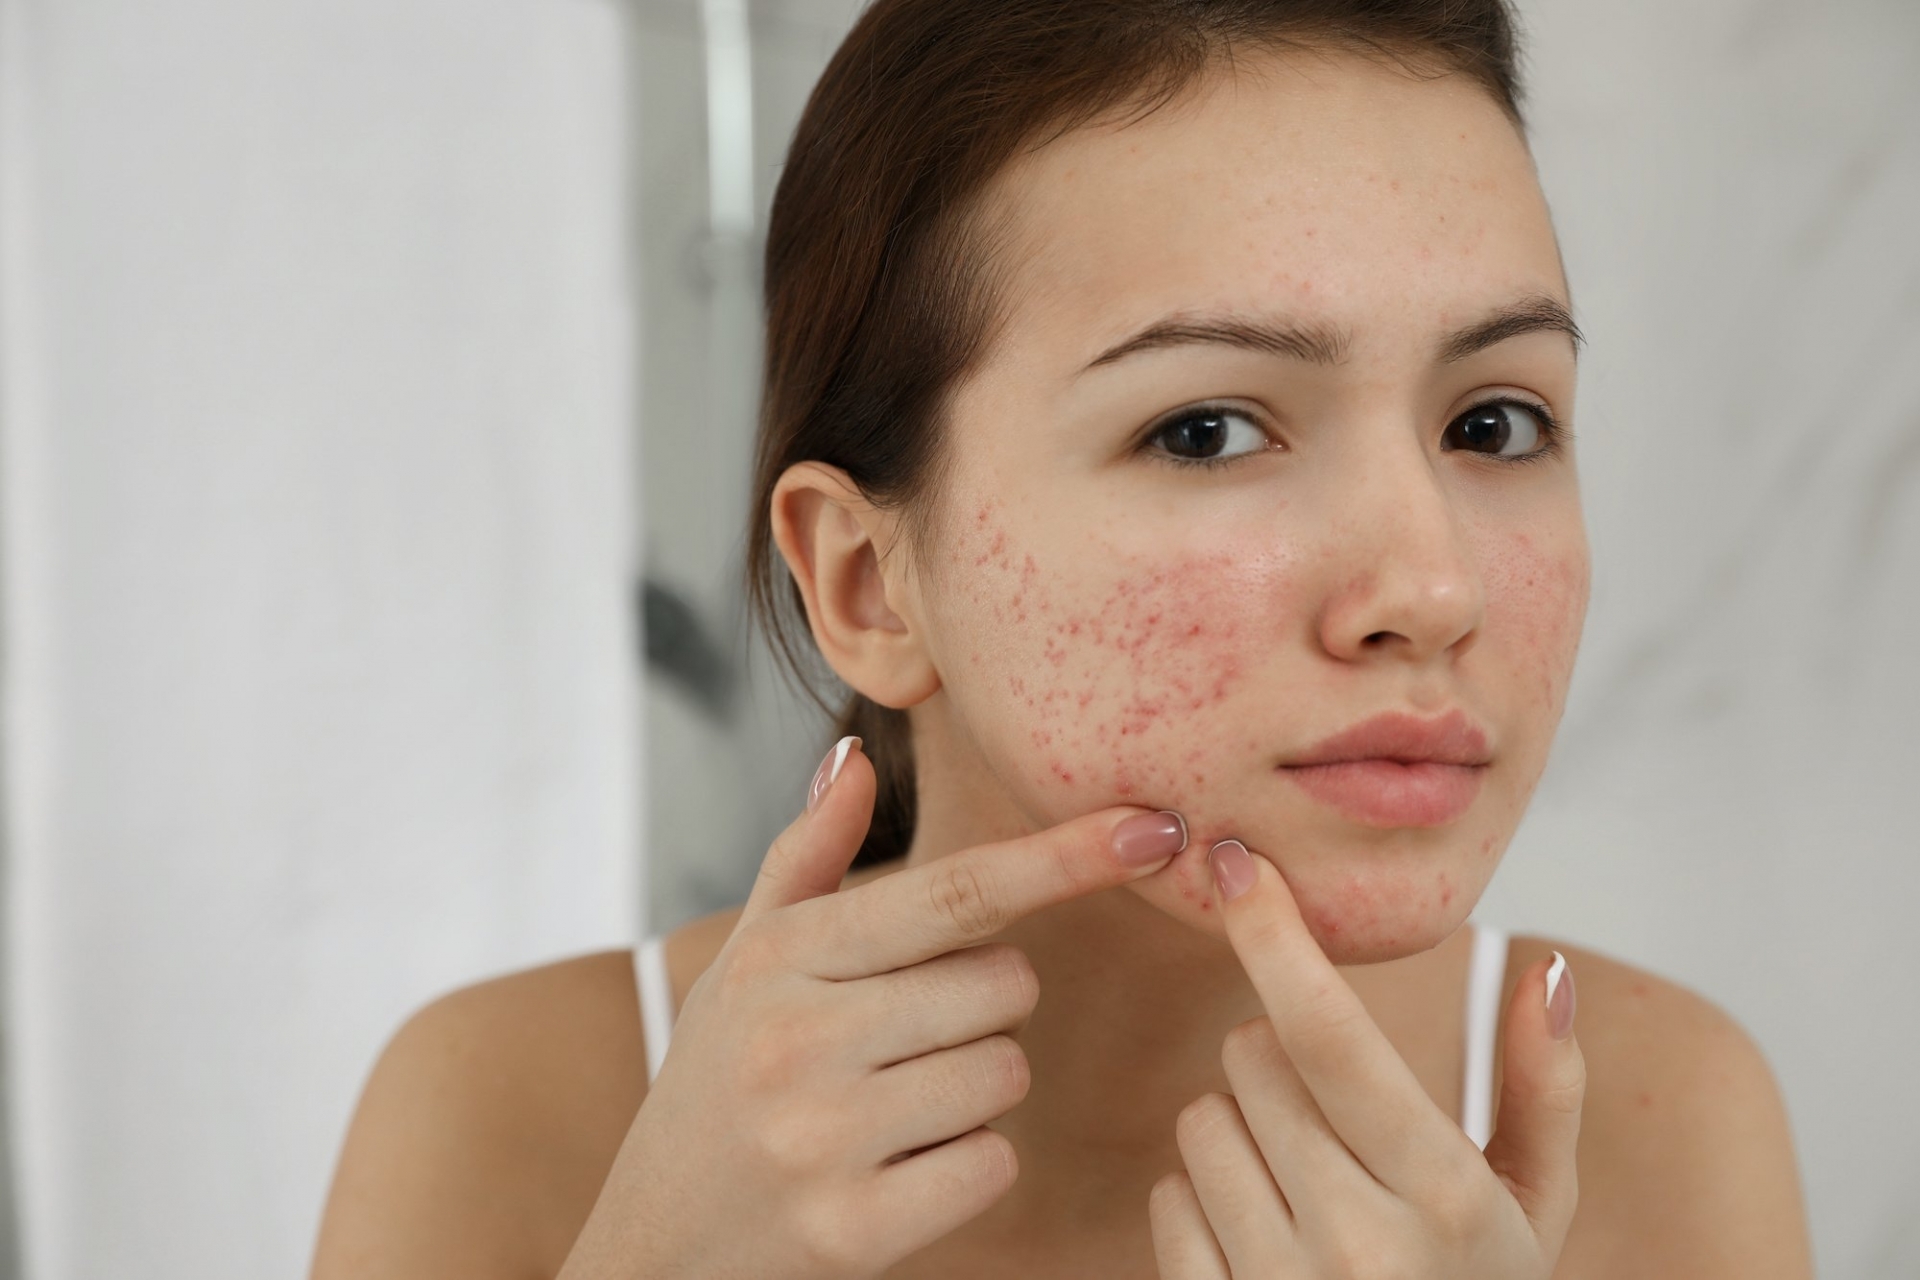 How To Remove Acne Scars: Simple Natural & Medical Treatments